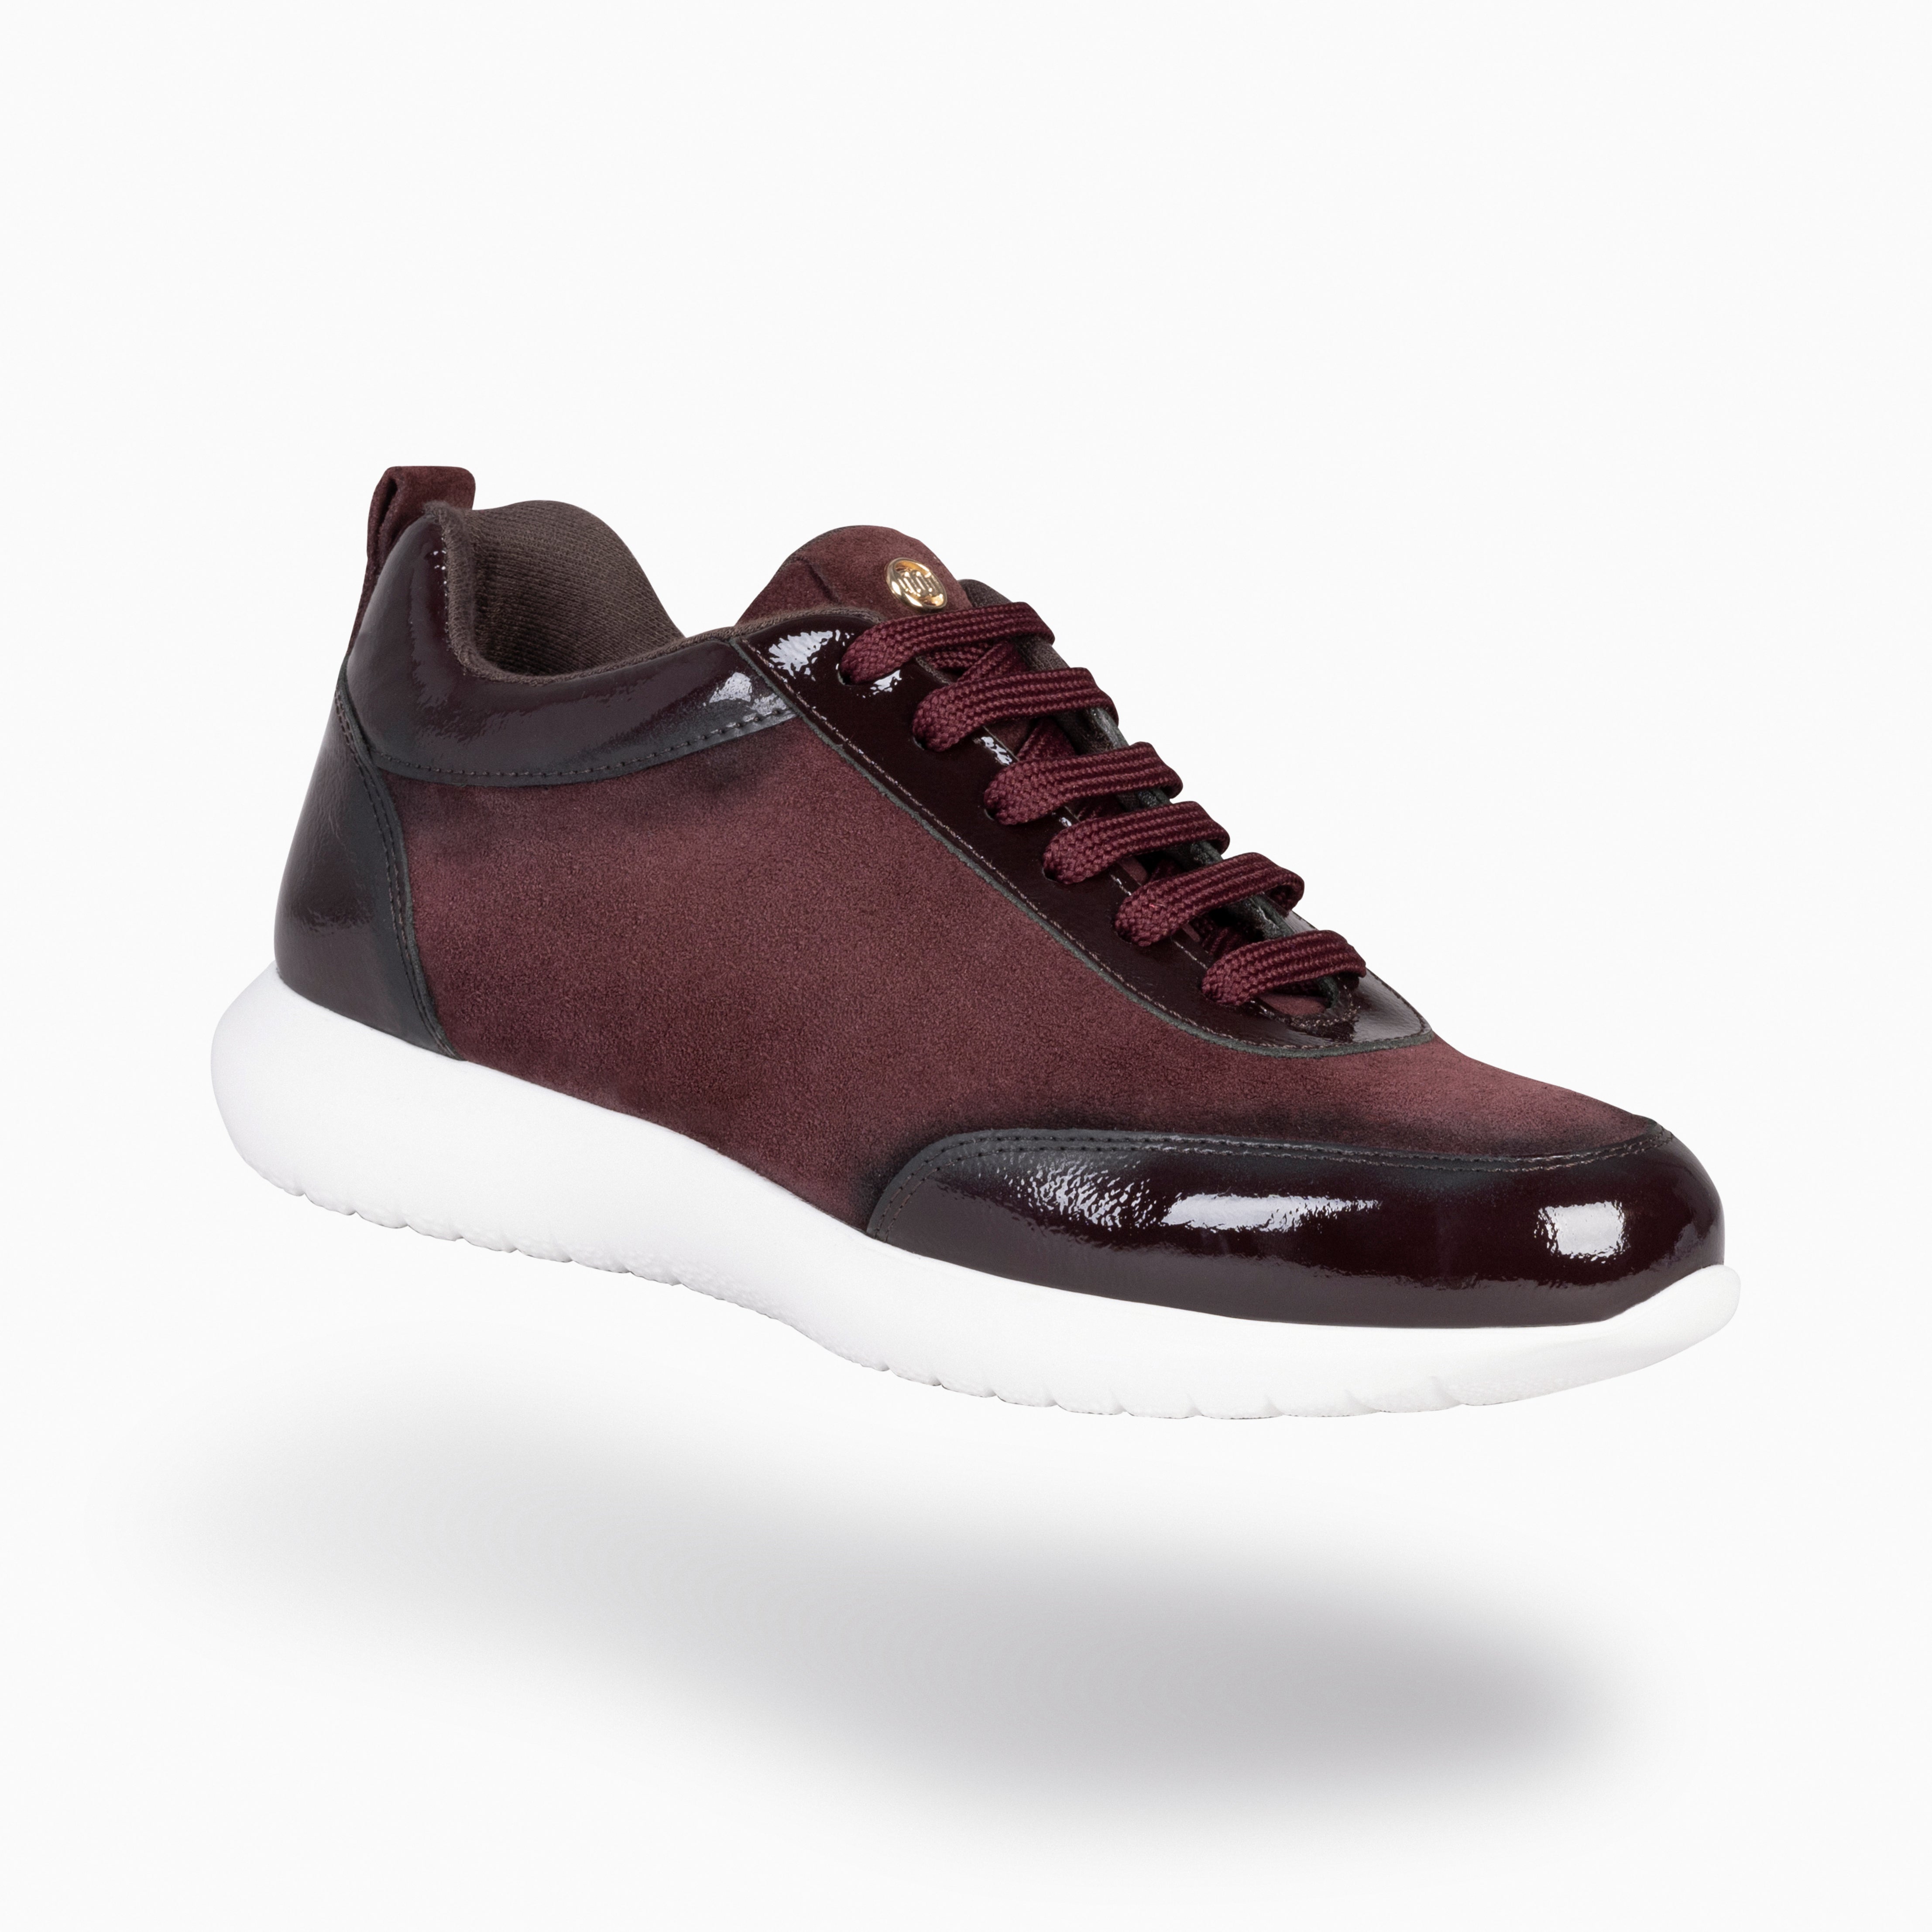 LOIRA - BURGUNDY Sneakers with Patent Leather